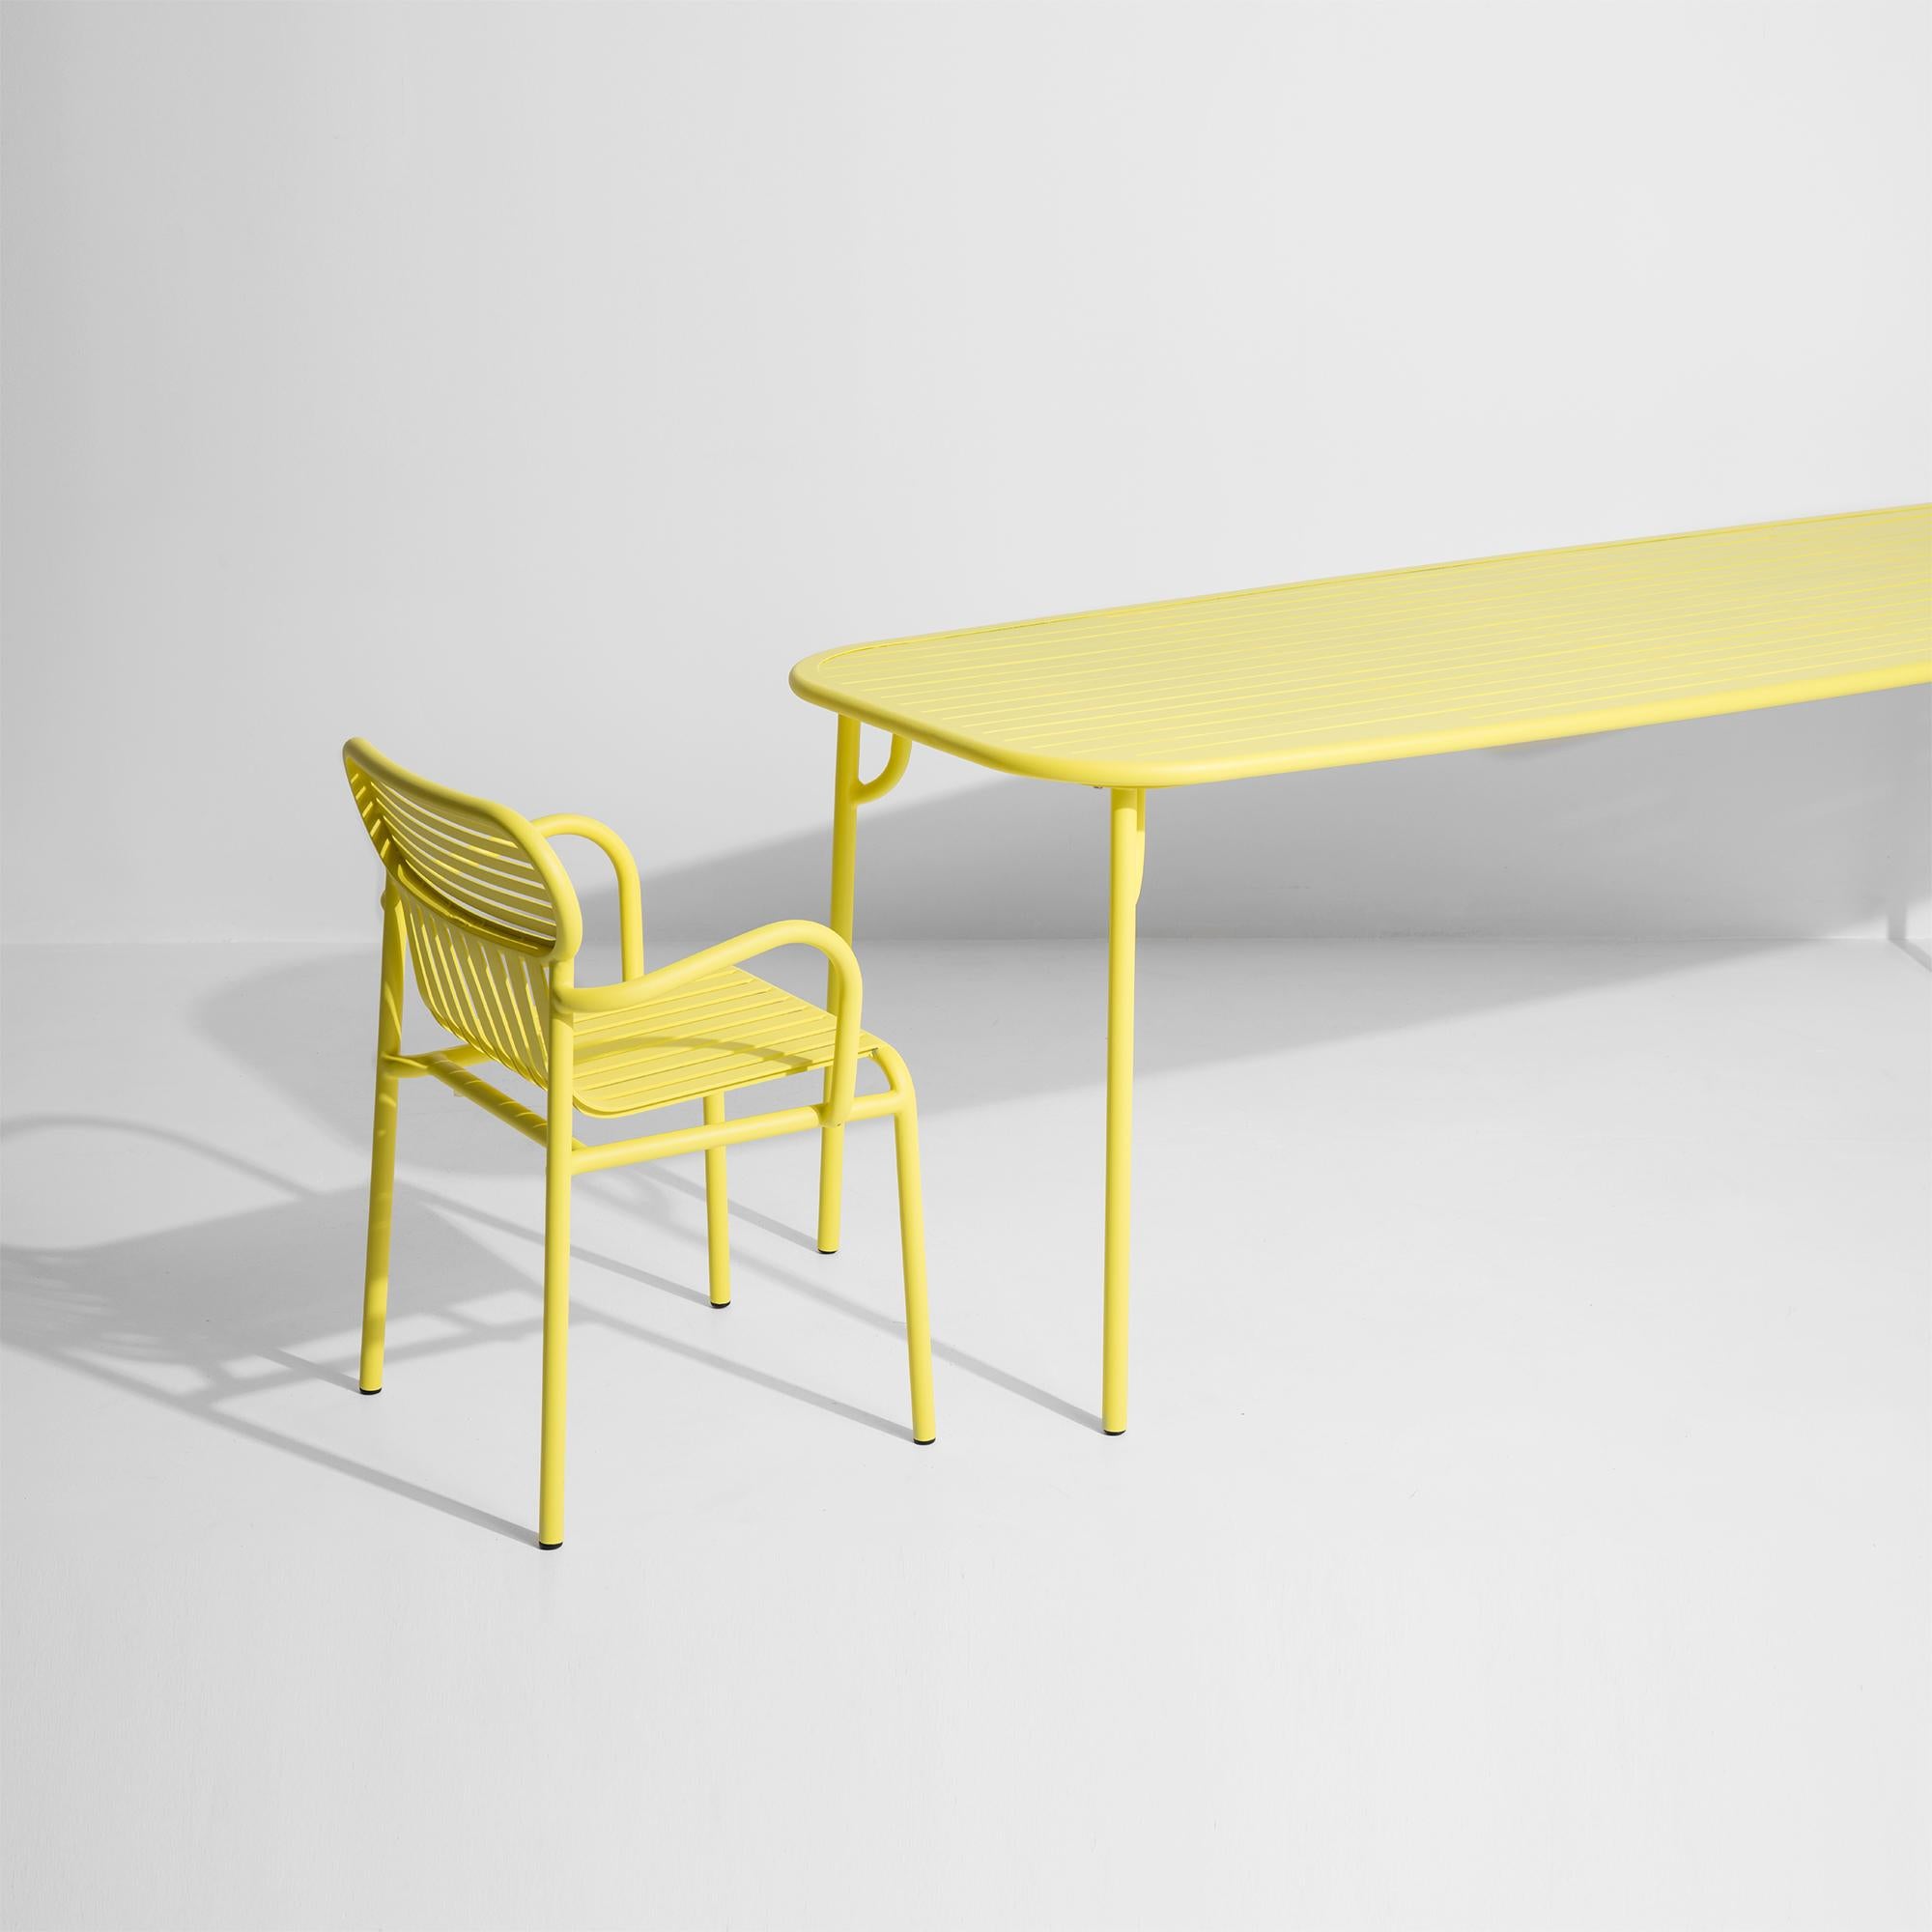 Petite Friture Week-End Large Rectangular Dining Table in Yellow with Slats For Sale 4